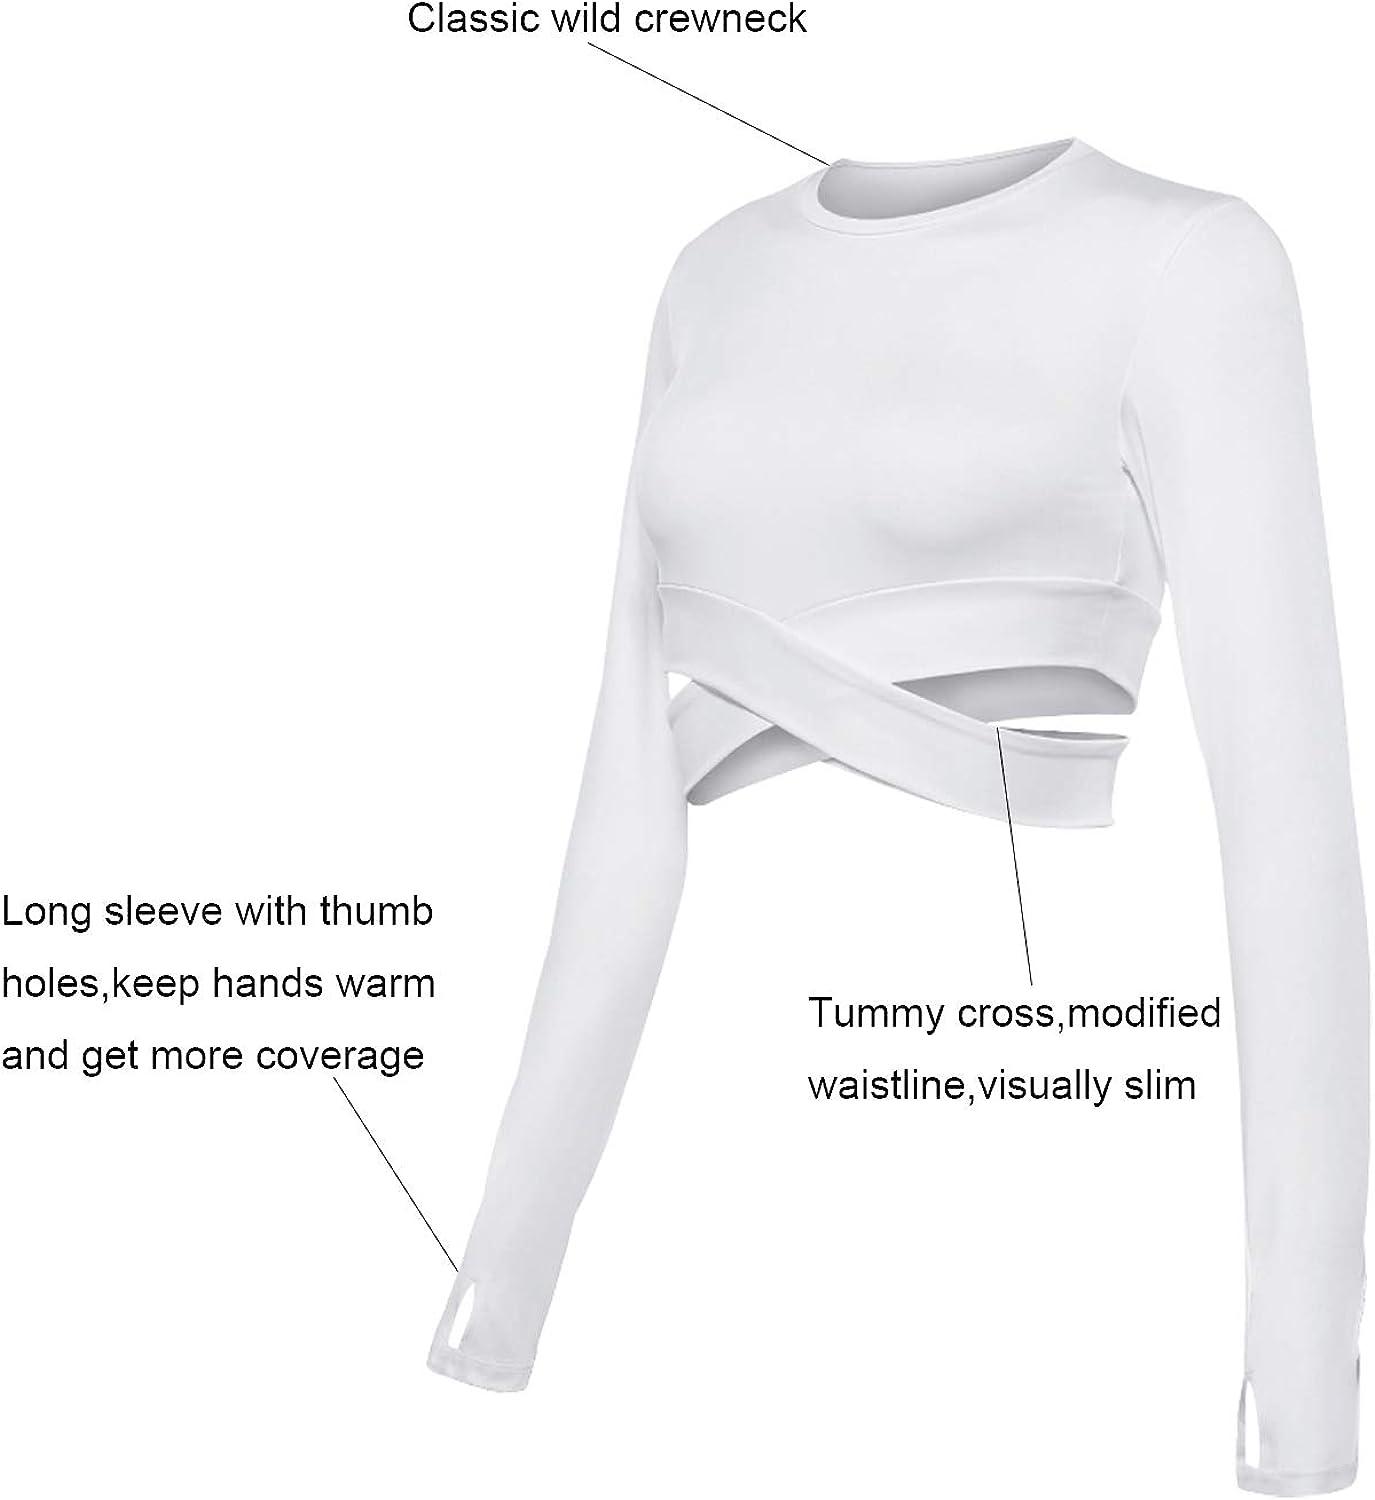 DREAM SLIM Short Sleeve Crop Tops for Women Tummy Cross Fitted